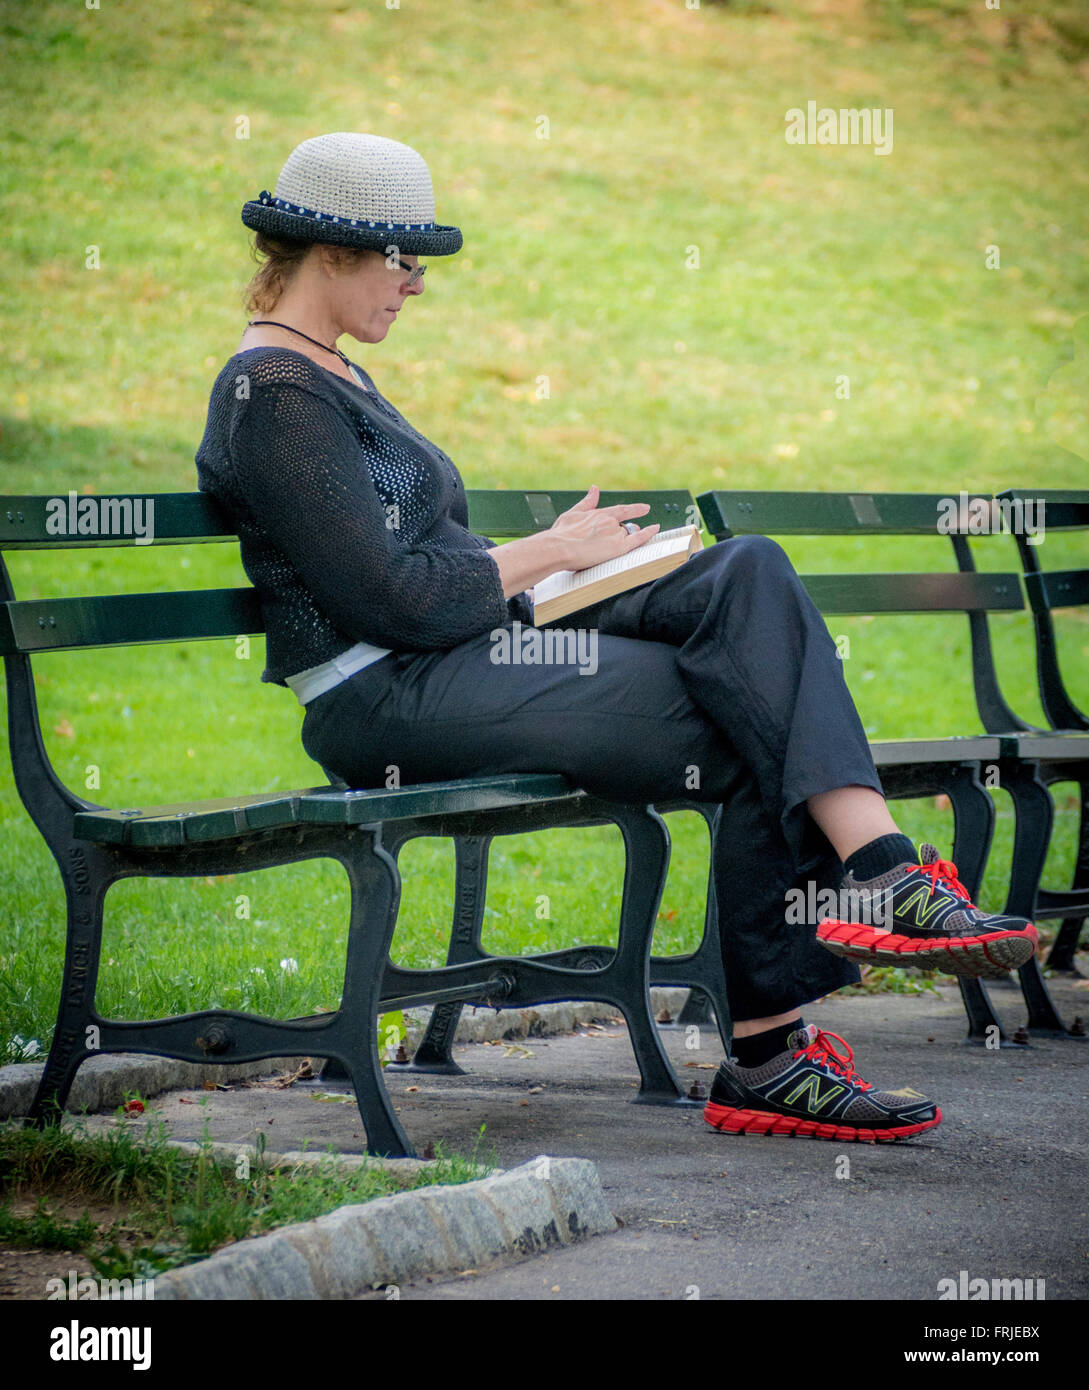 Woman sitting on bench in Central Park, New York City, USA. Banque D'Images